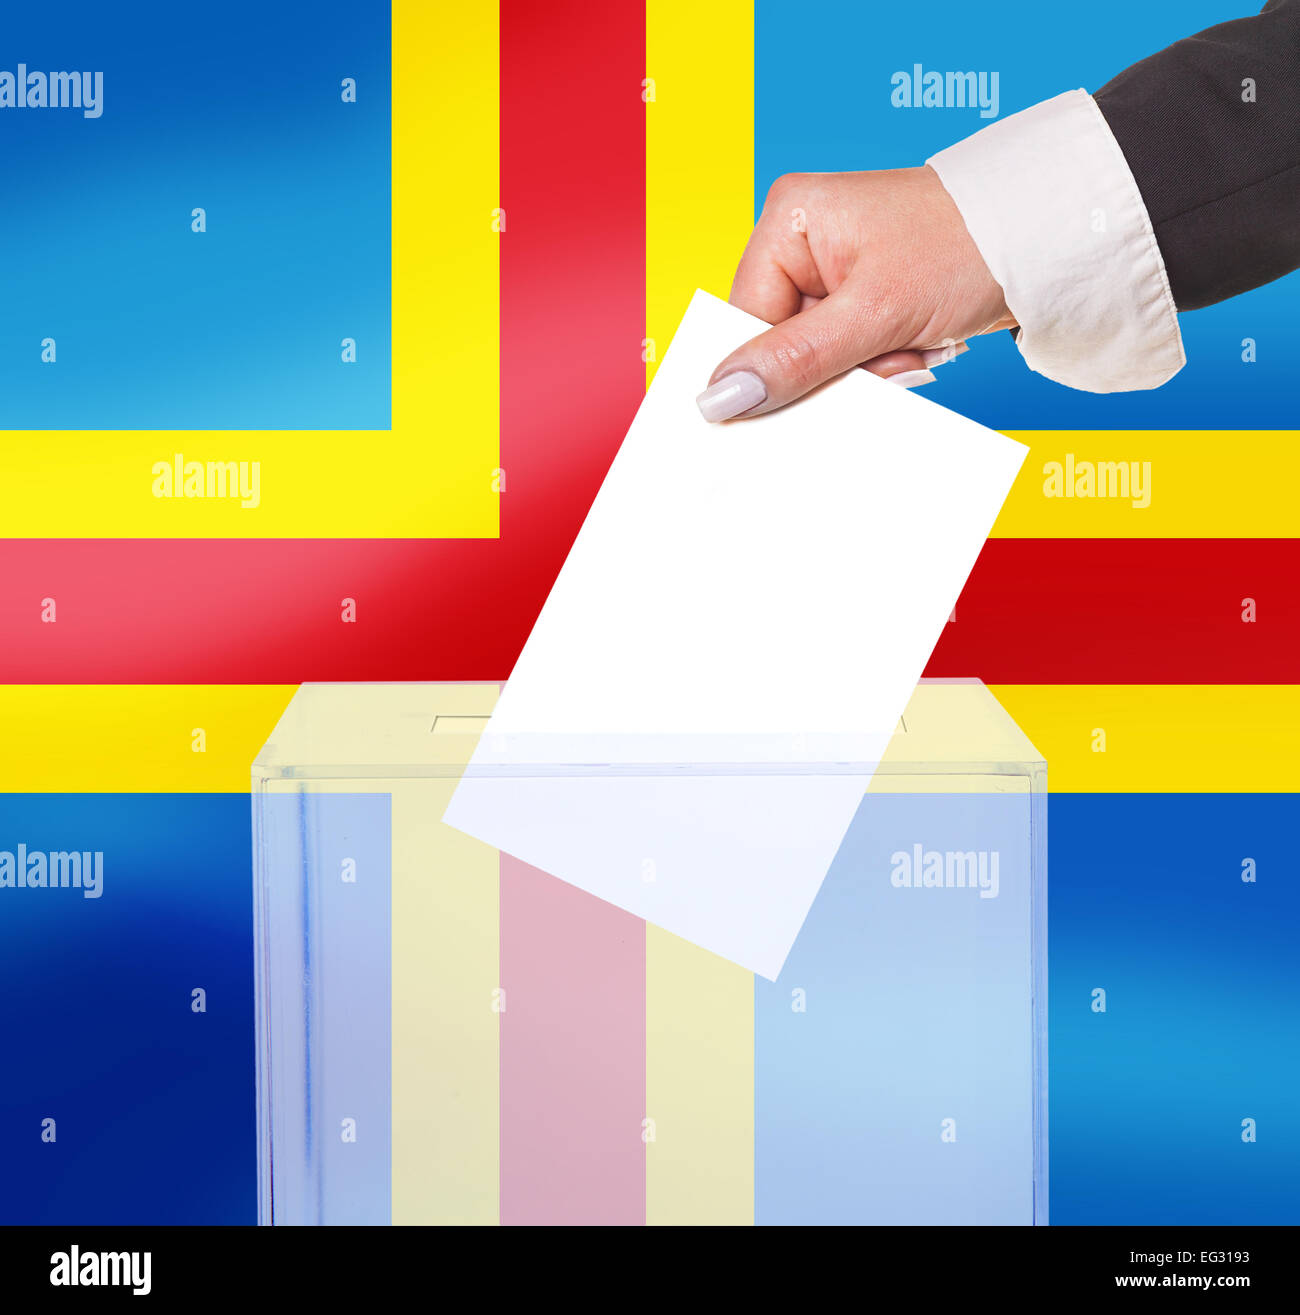 electoral vote by ballot, under the Aland Islands flag Stock Photo